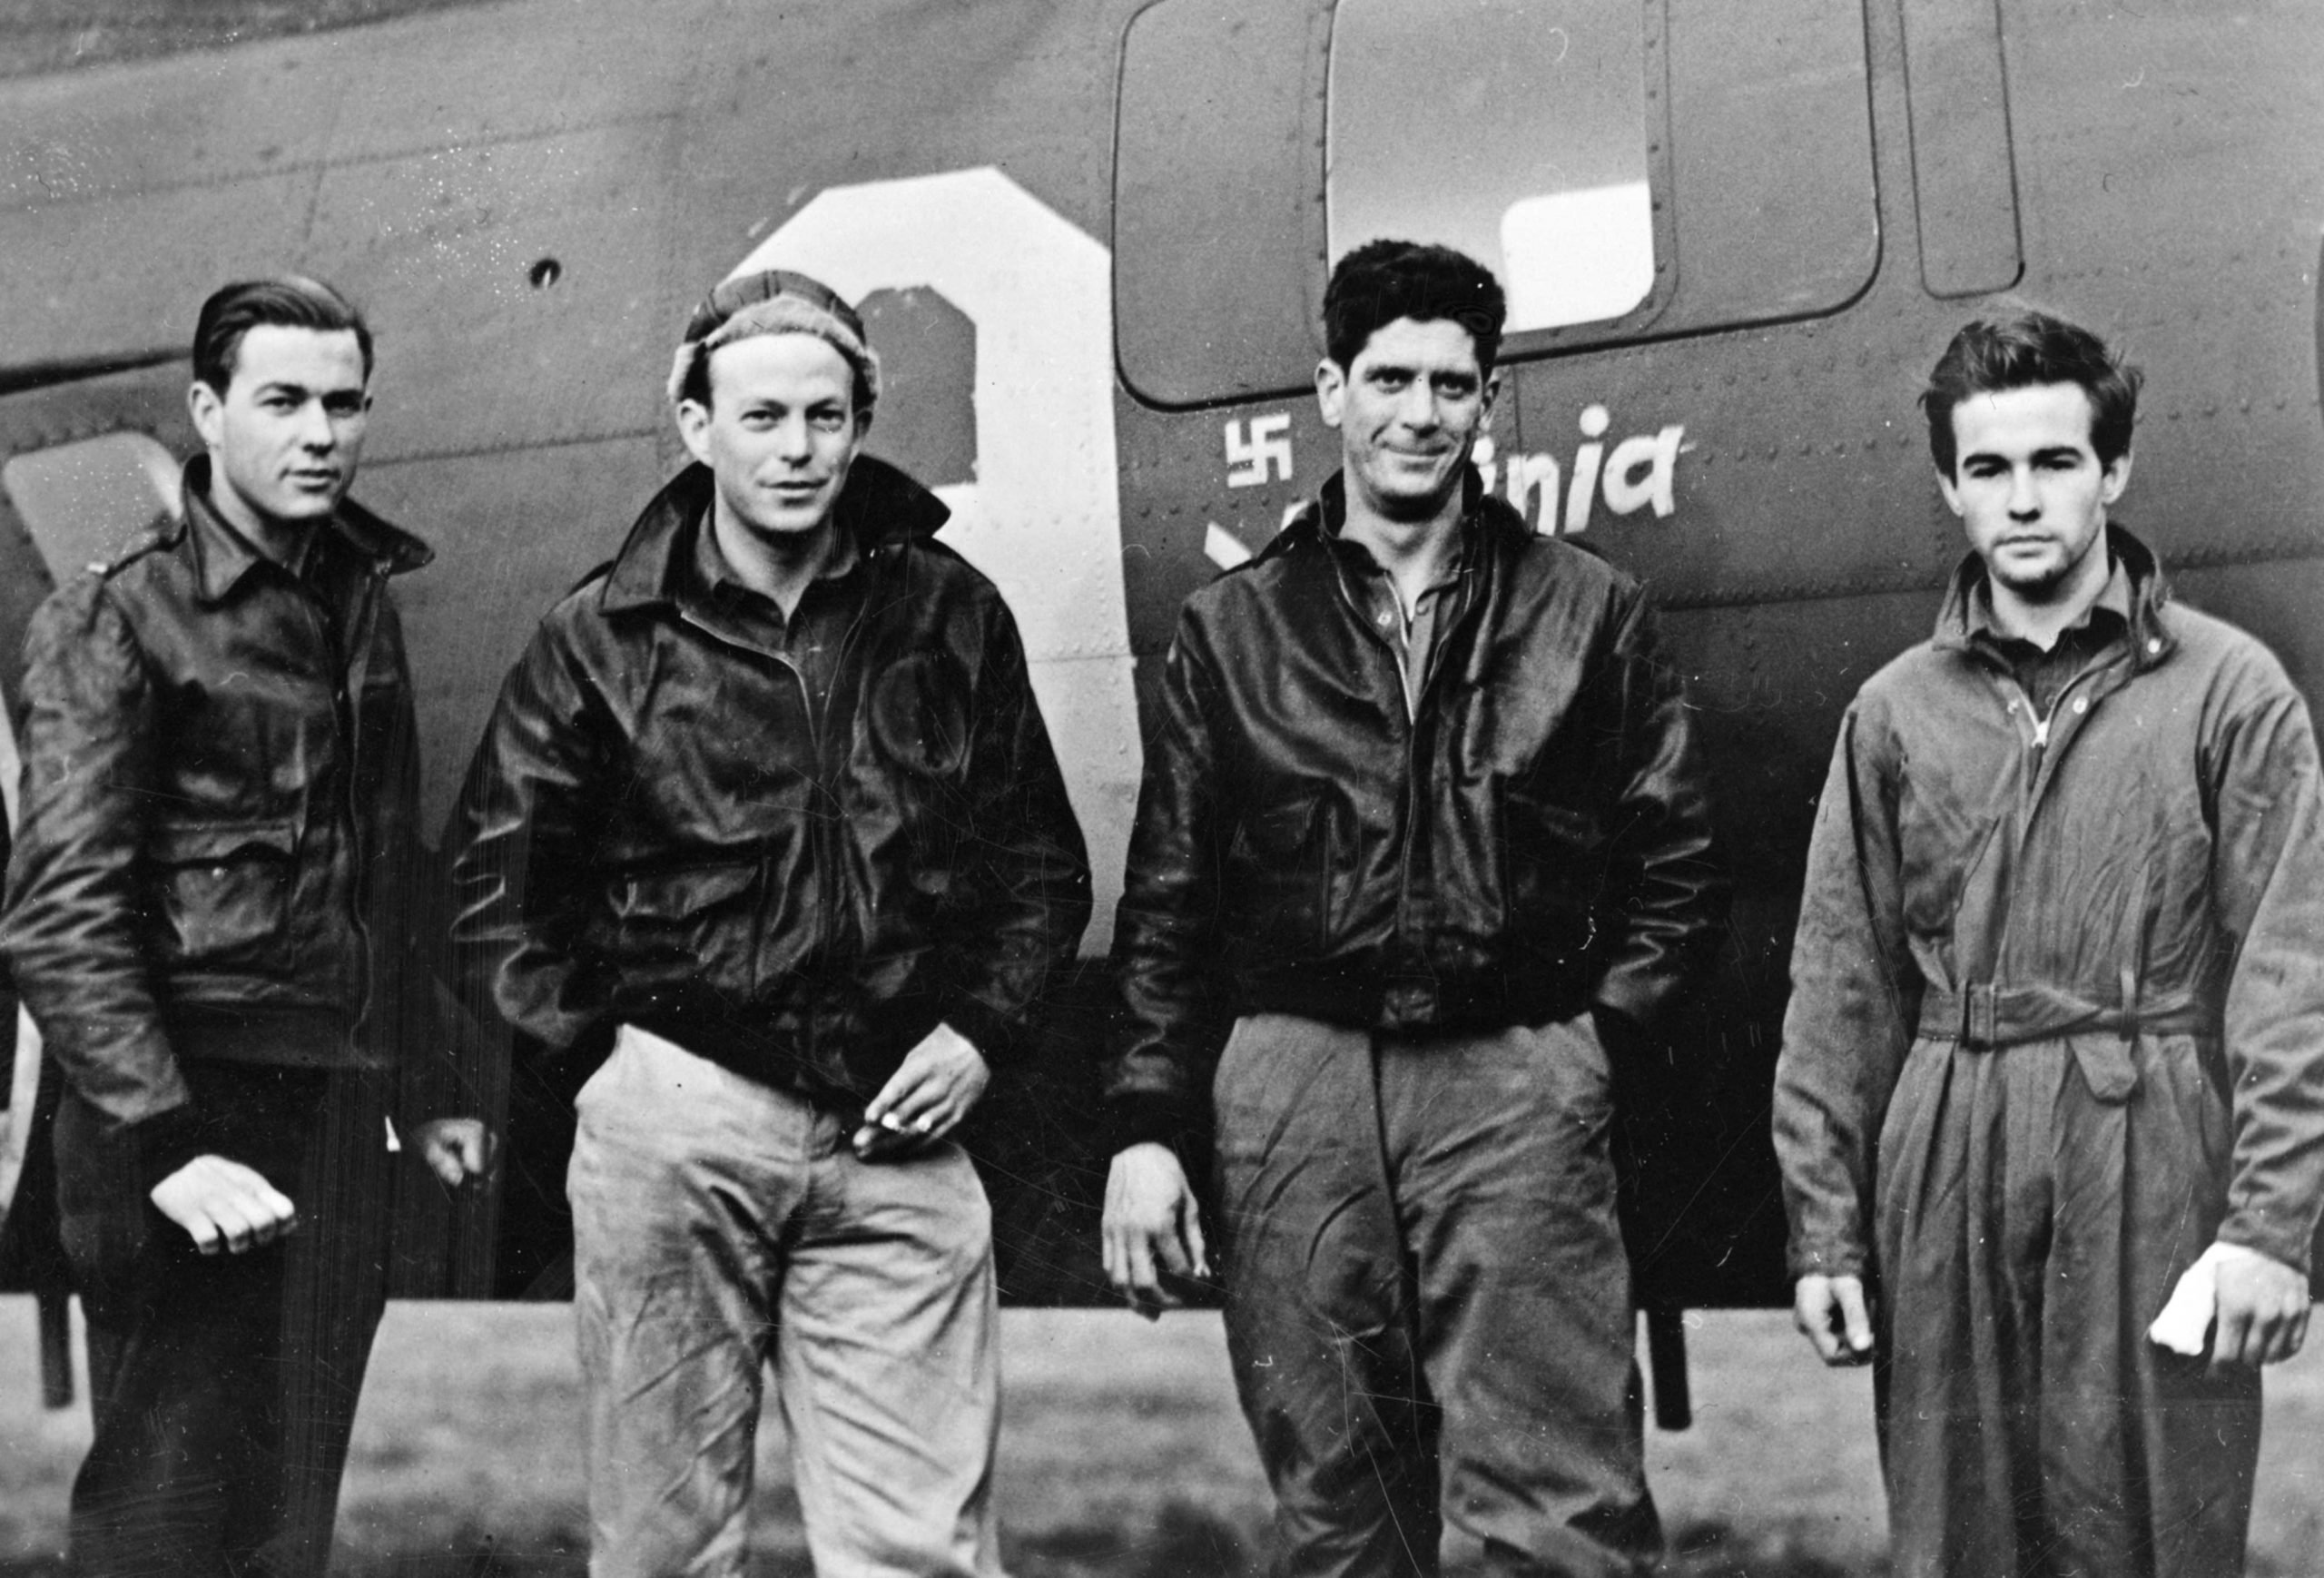 Four crew members of a B-17 bomber